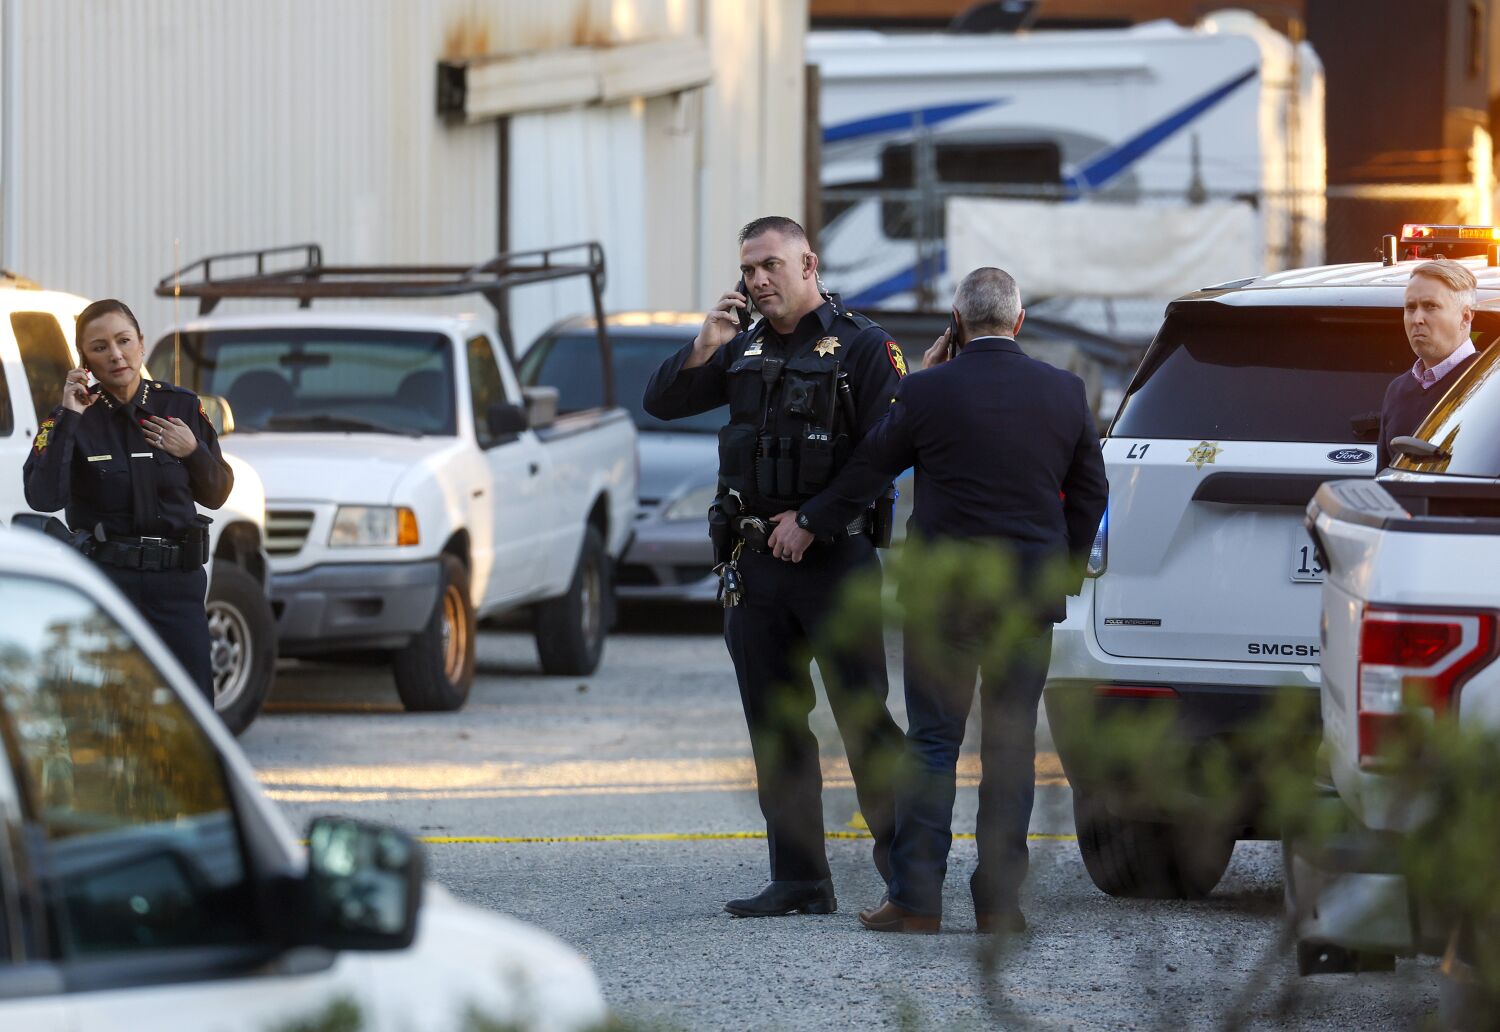 2 victims identified in Half Moon Bay shootings that left 7 dead